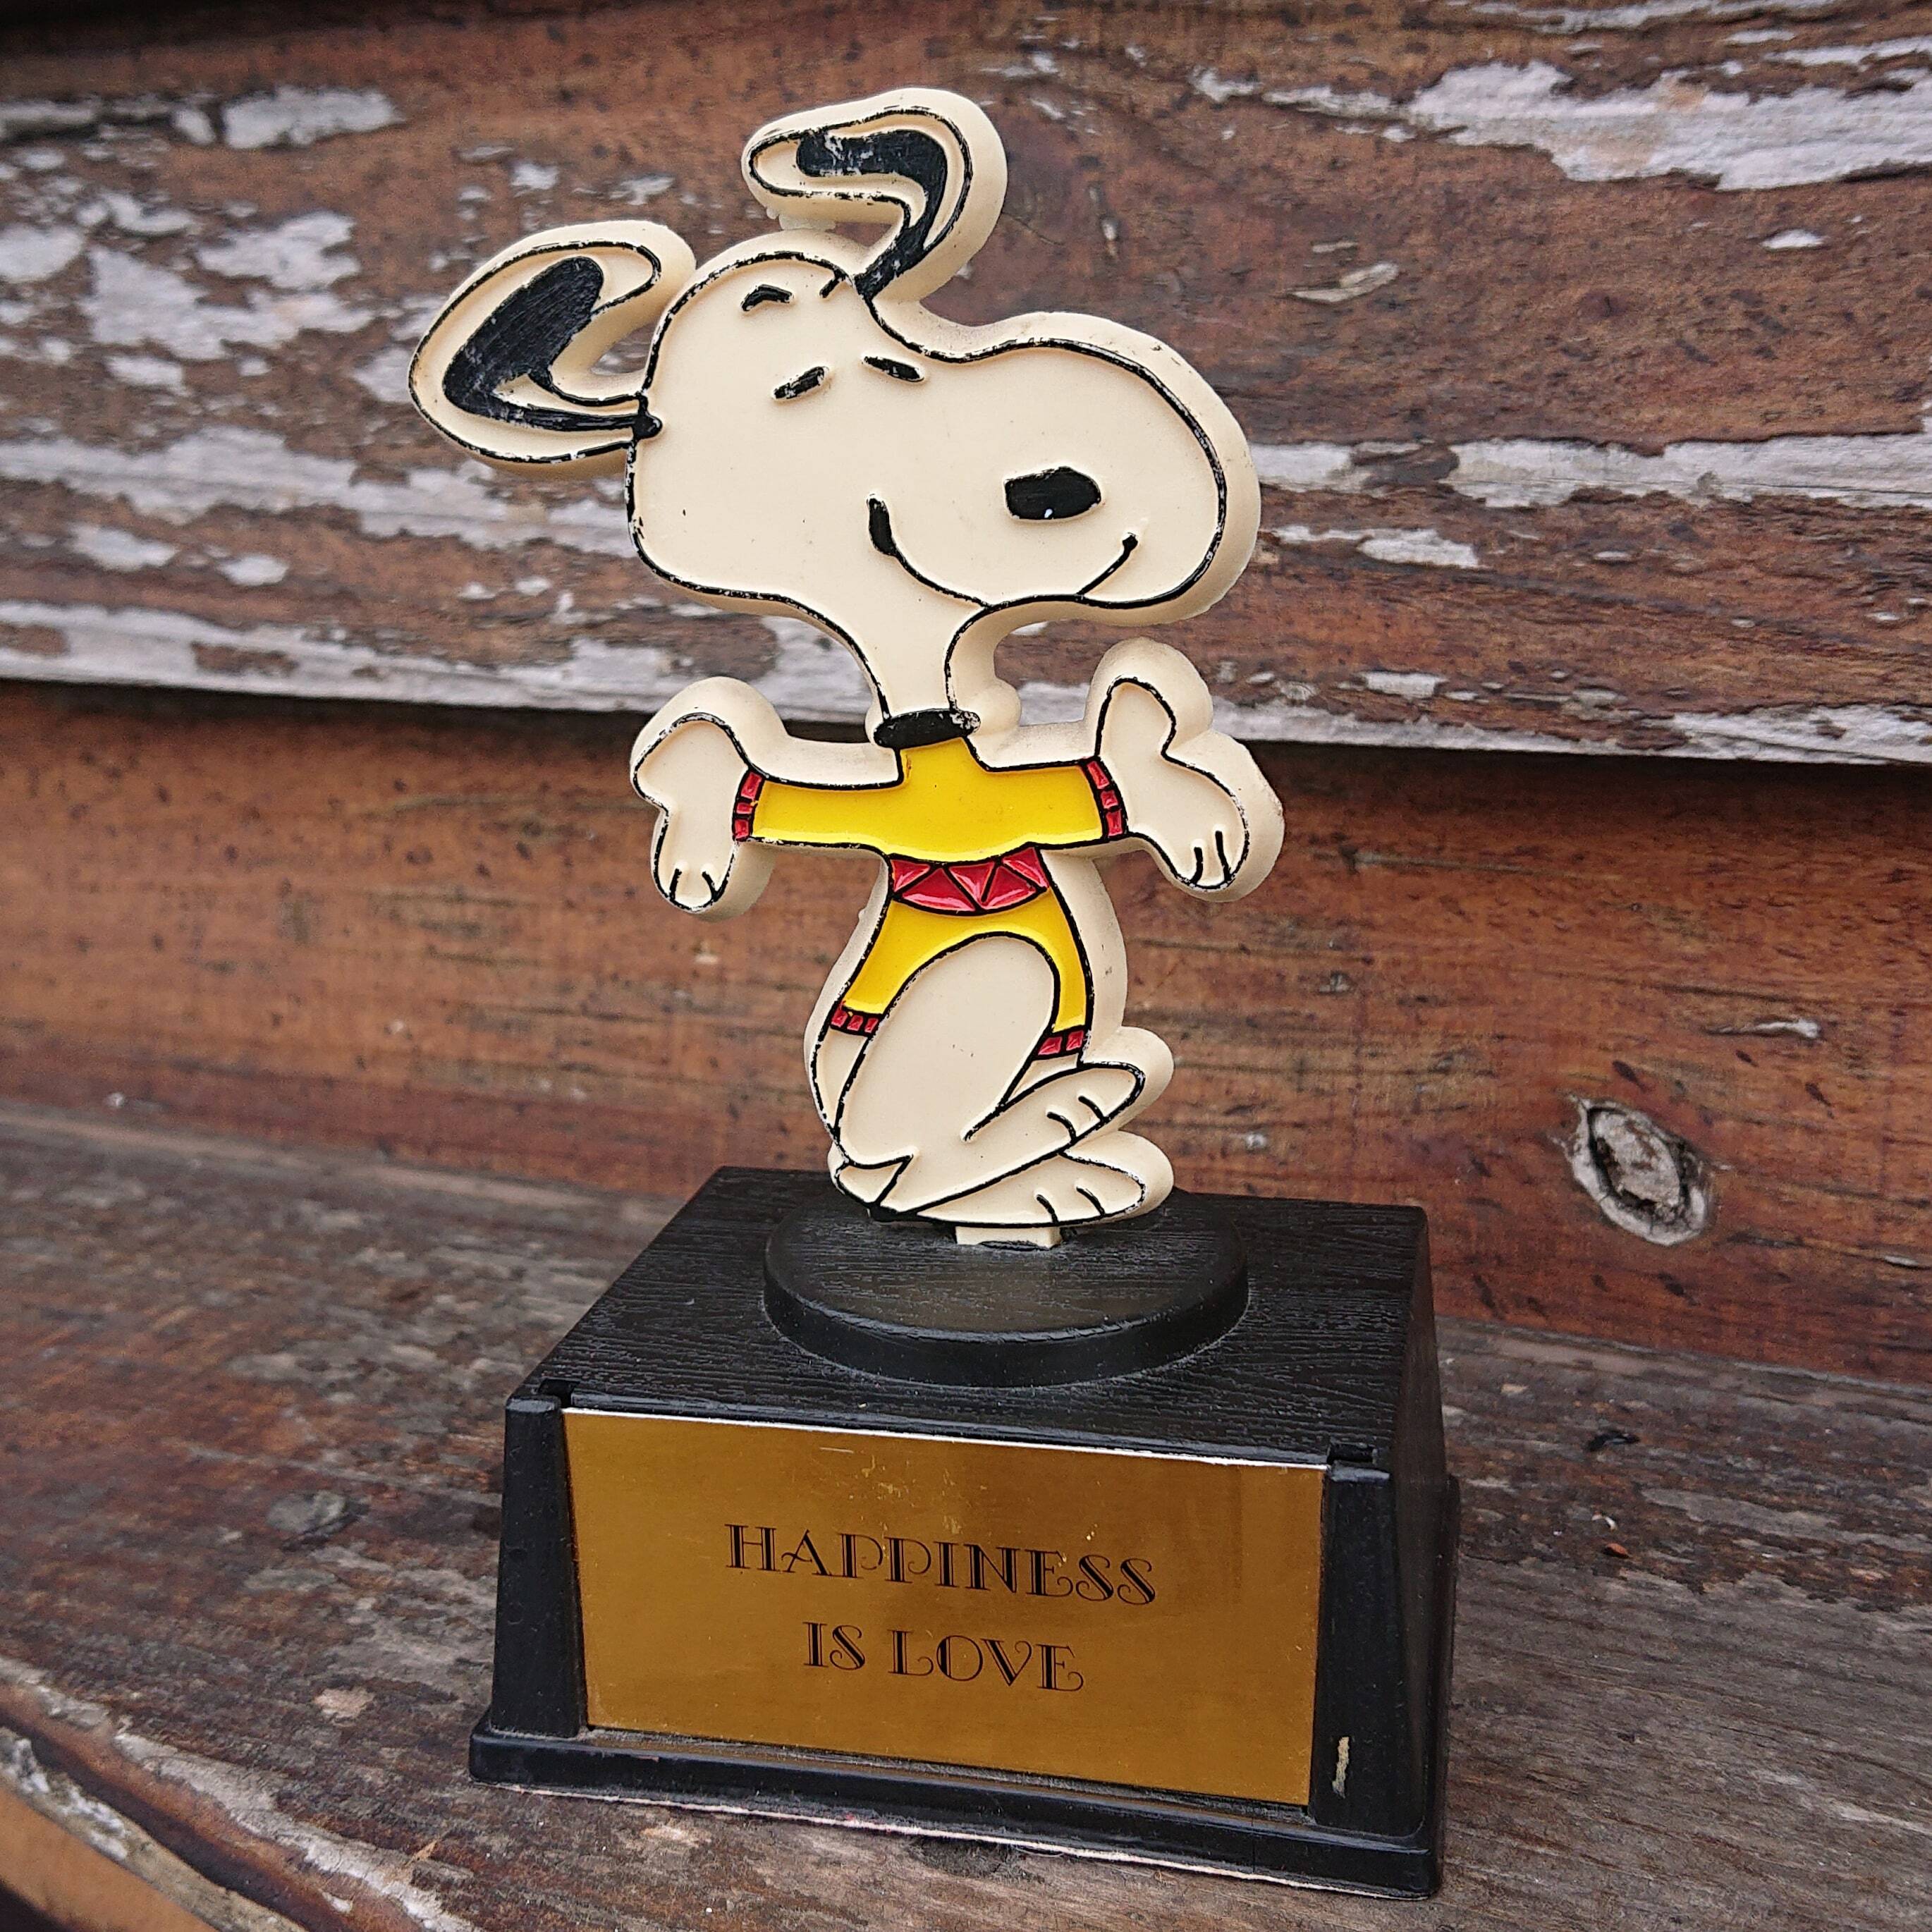 70's Snoopy Trophy / Happiness is Love /AVIVA | TUSH GENERAL STORE